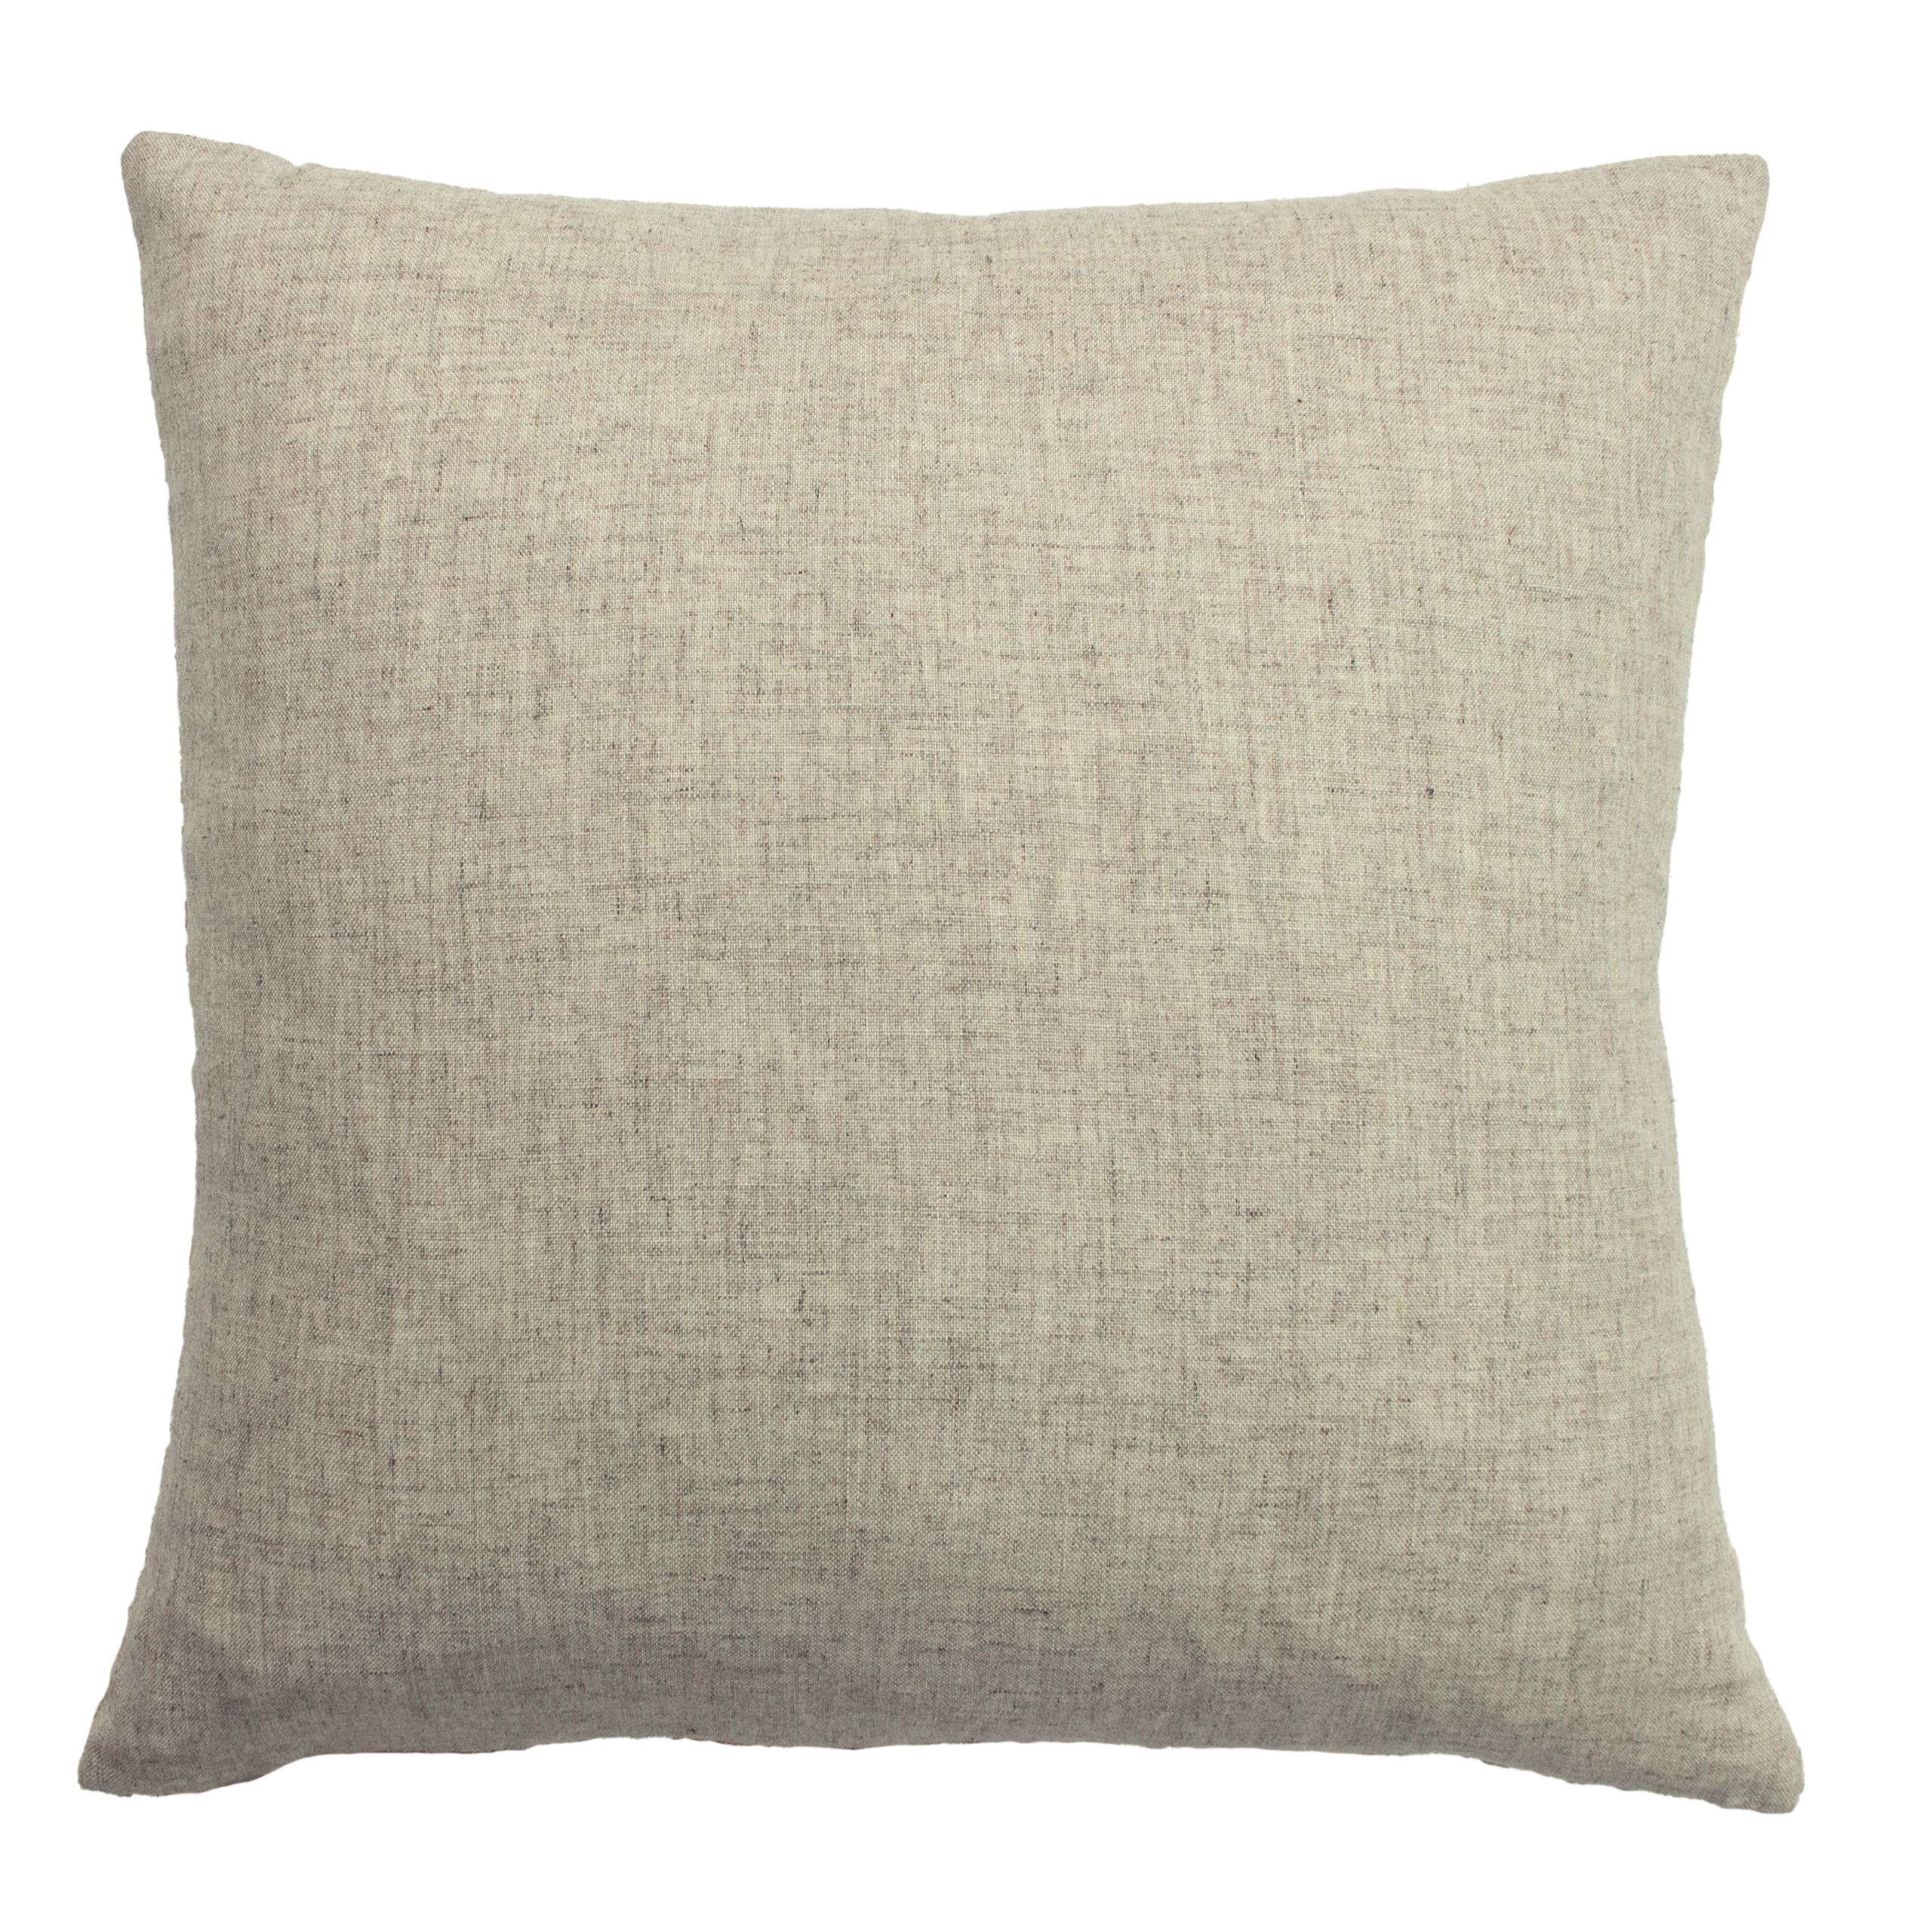 Perfect to add colour and texture to any room, the Delphi cushion features a maze-like design on a velvet jacquard for a plush finish. Contrasted with the linen-look reverse, for contemporary style.